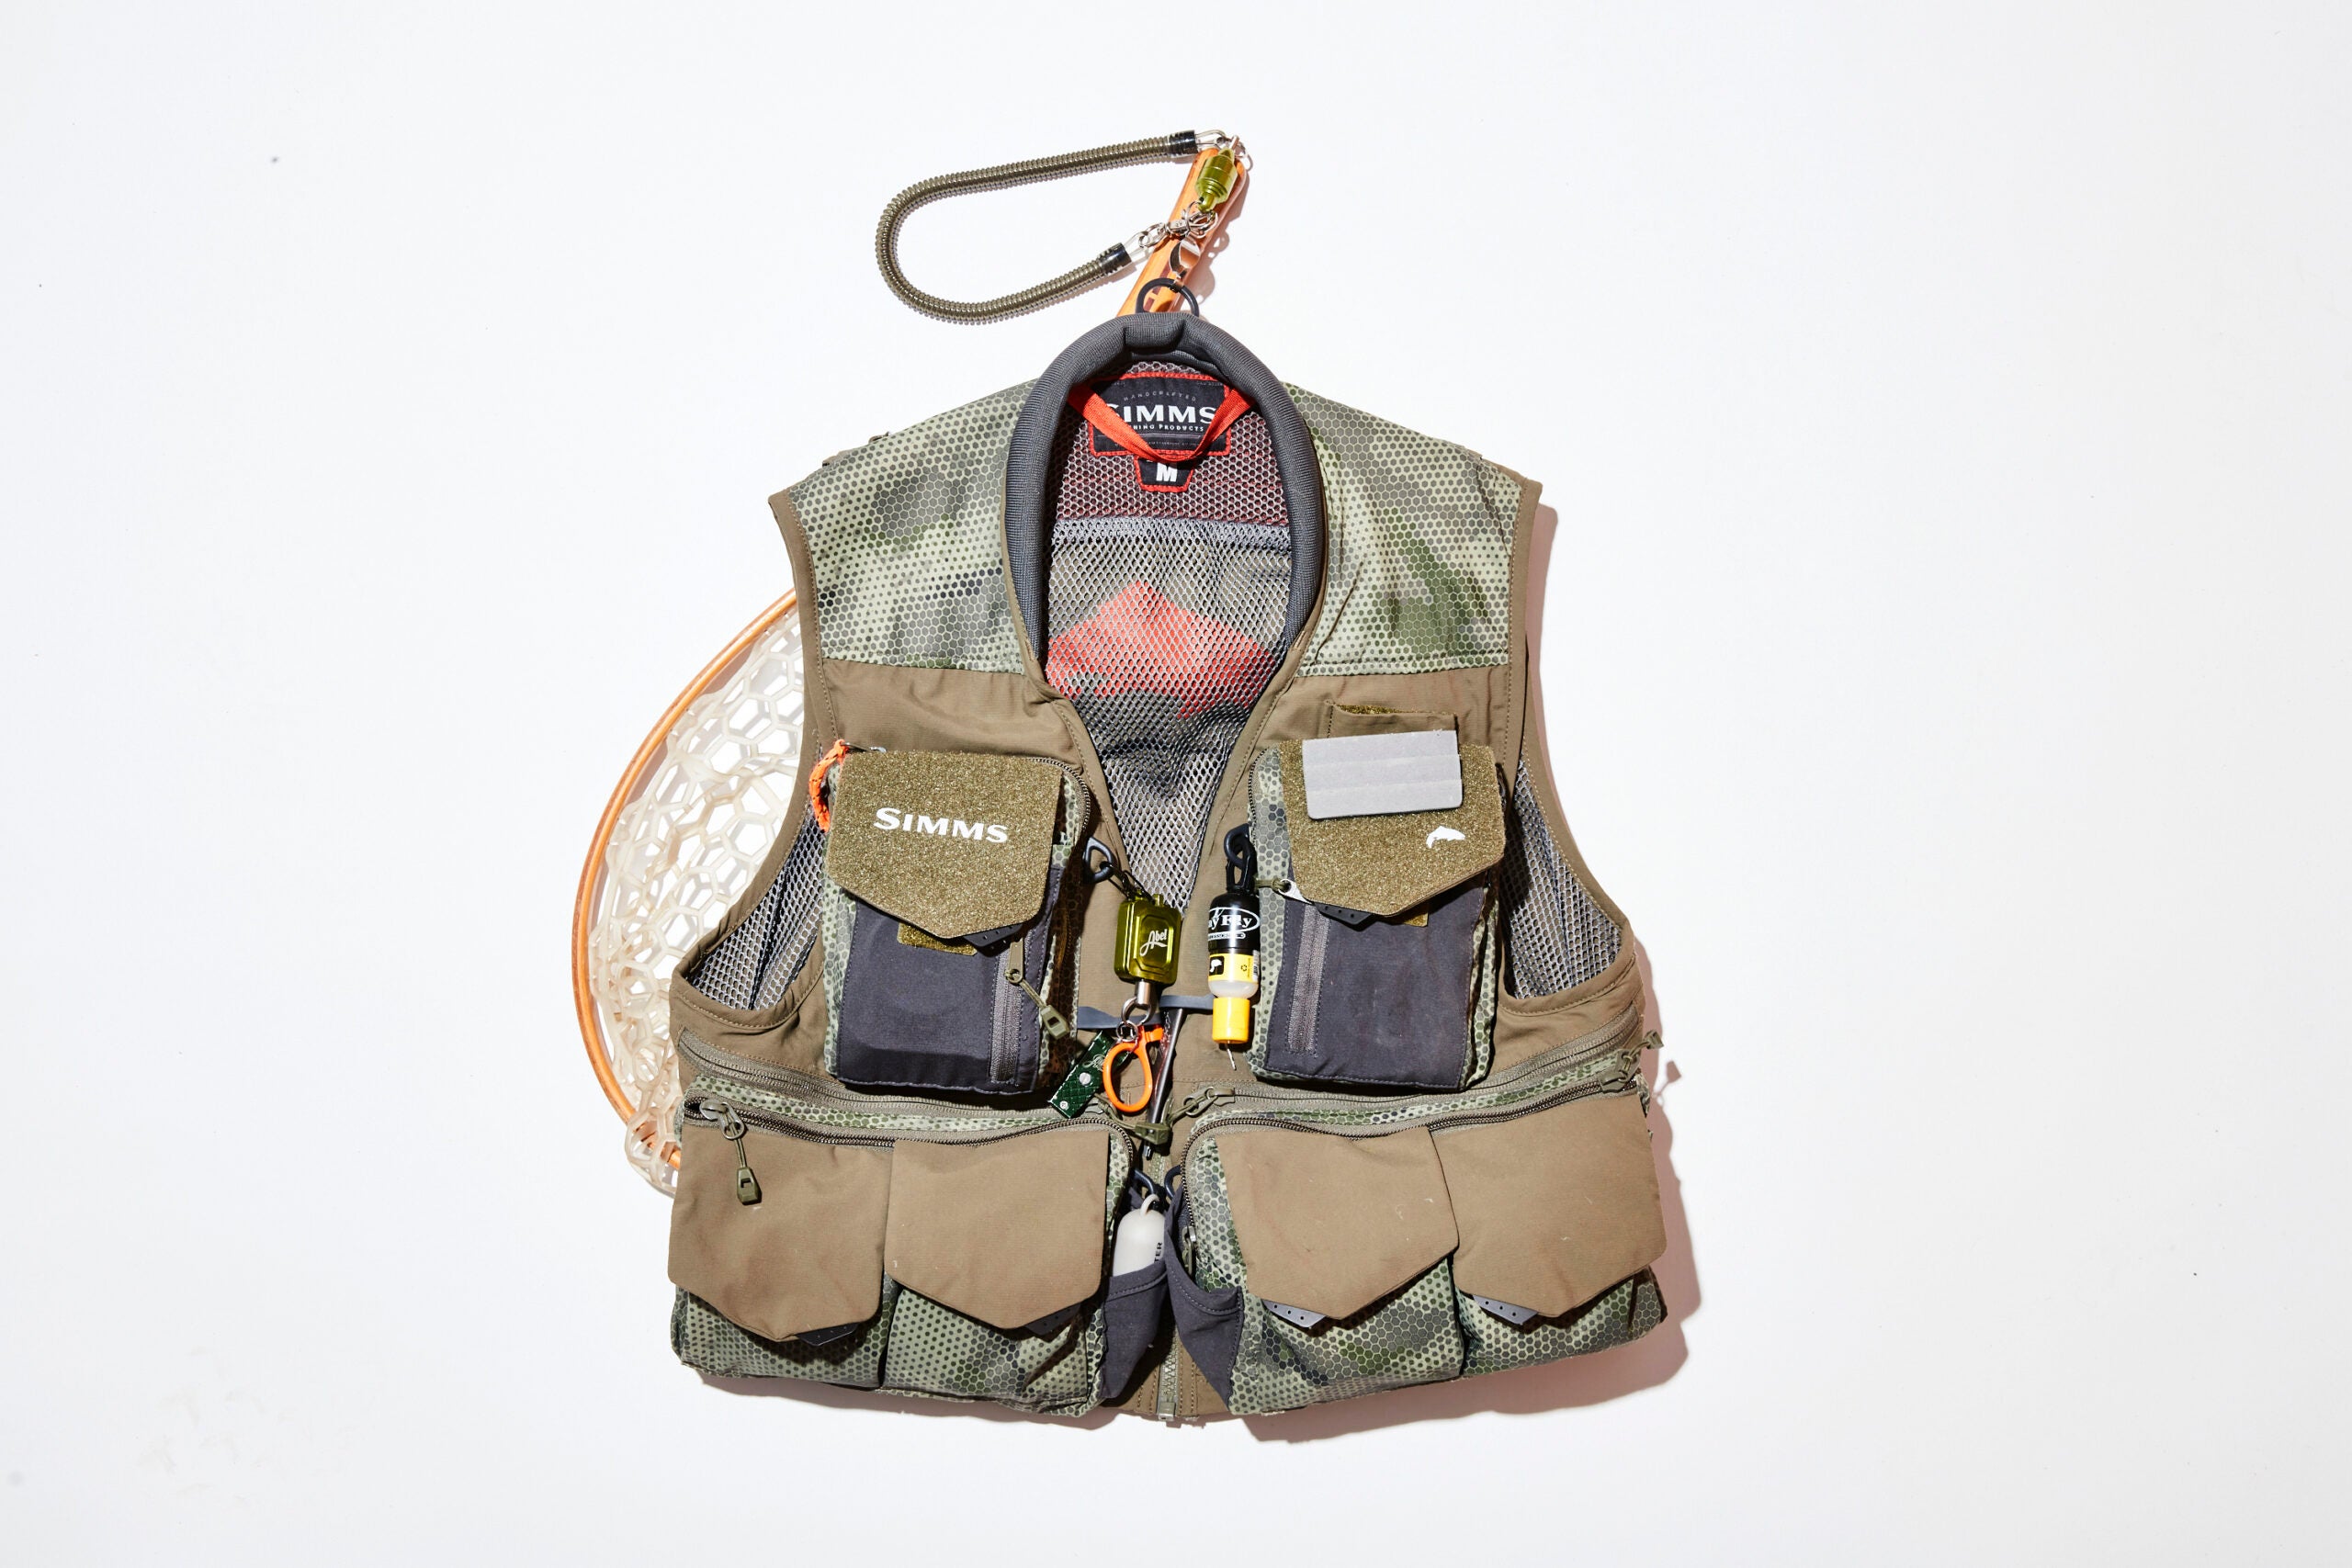 Fly Fishing Vests to Add to Your Gear Collection - Rod and Reel Fly Fishing